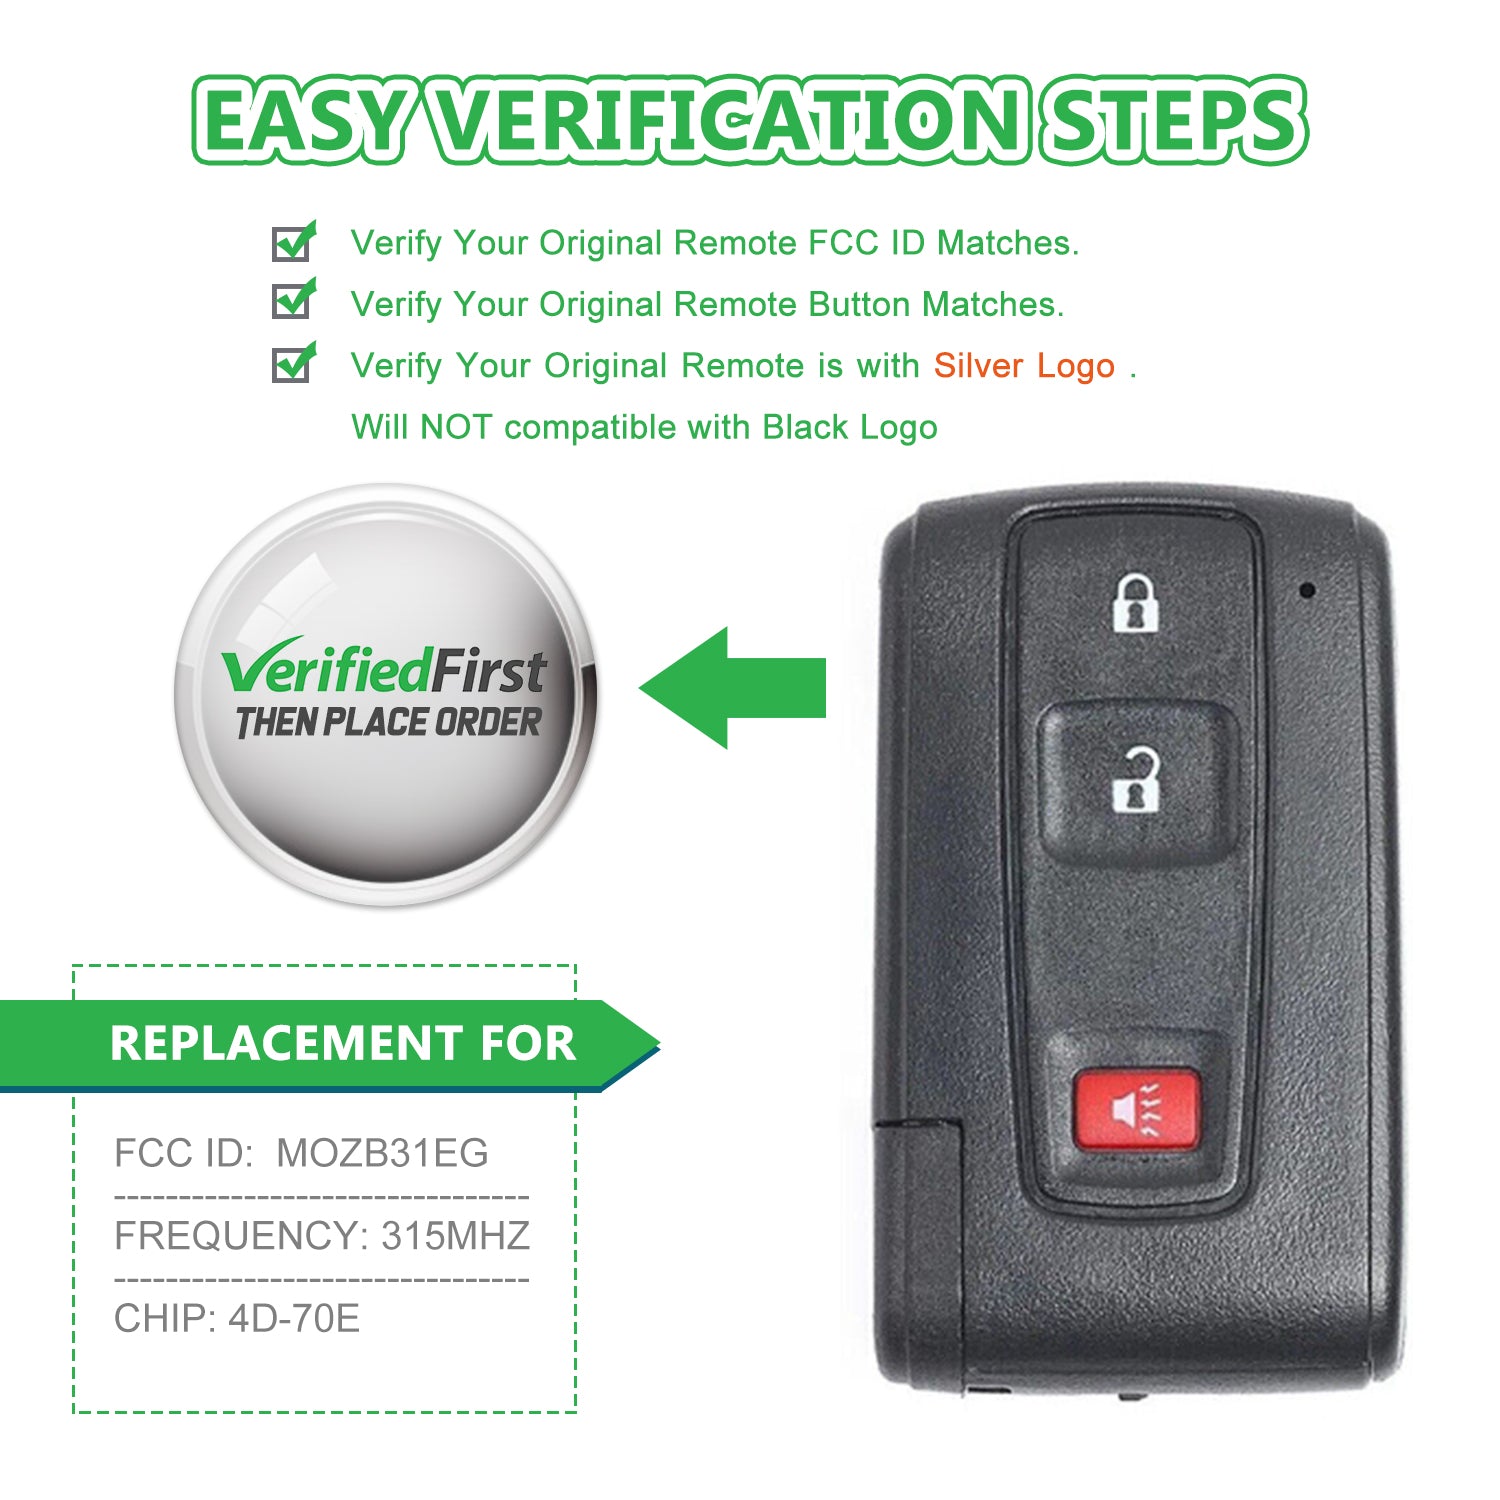 Lots of 5 Smart Car Key Fob Replacement for Toyota Prius (Silver Logo Only) fits 2004 2005 2006 2007 2008 2009 Proximity 3 Button Remote MOZB31EG 4D-70E Chip